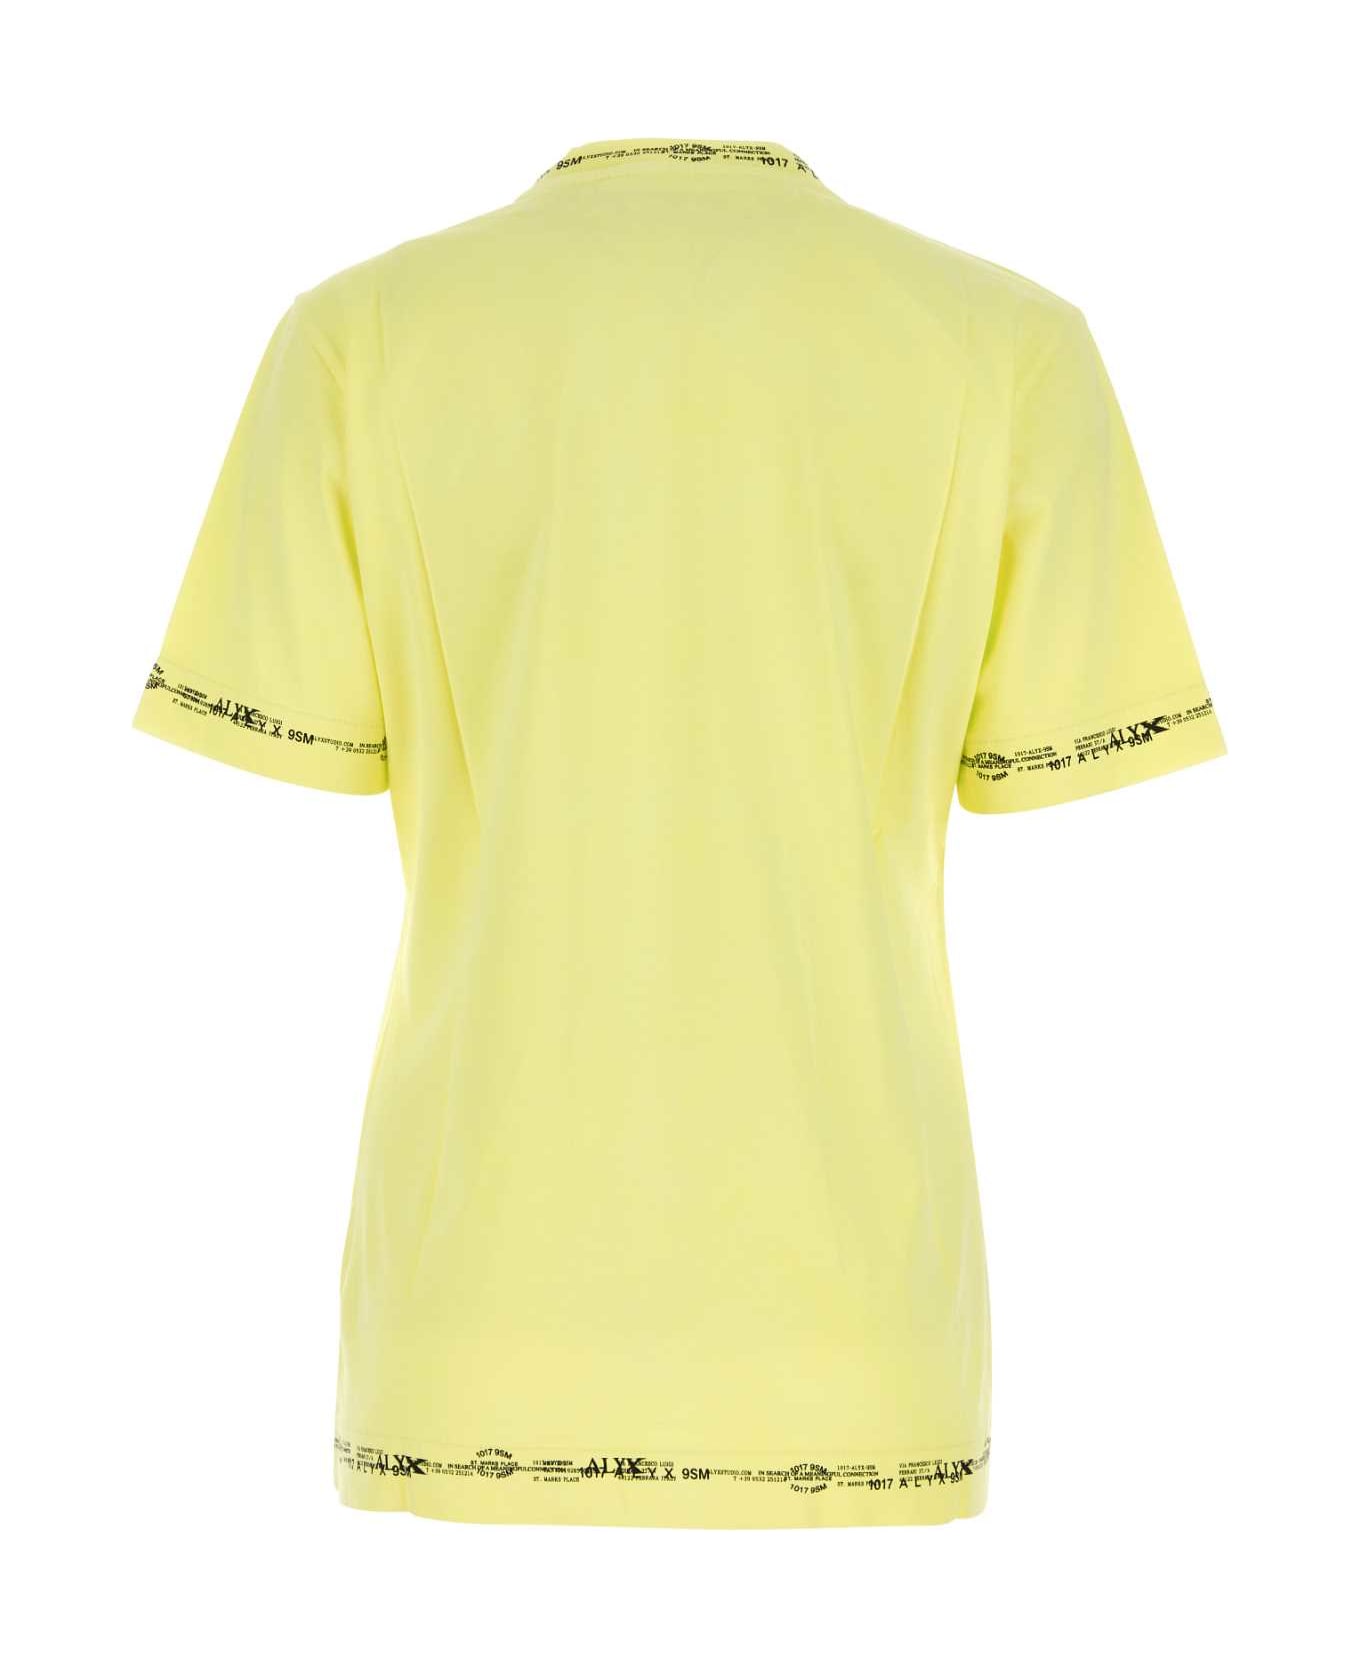 1017 ALYX 9SM Fluo Yellow Cotton T-shirt - YLW0042